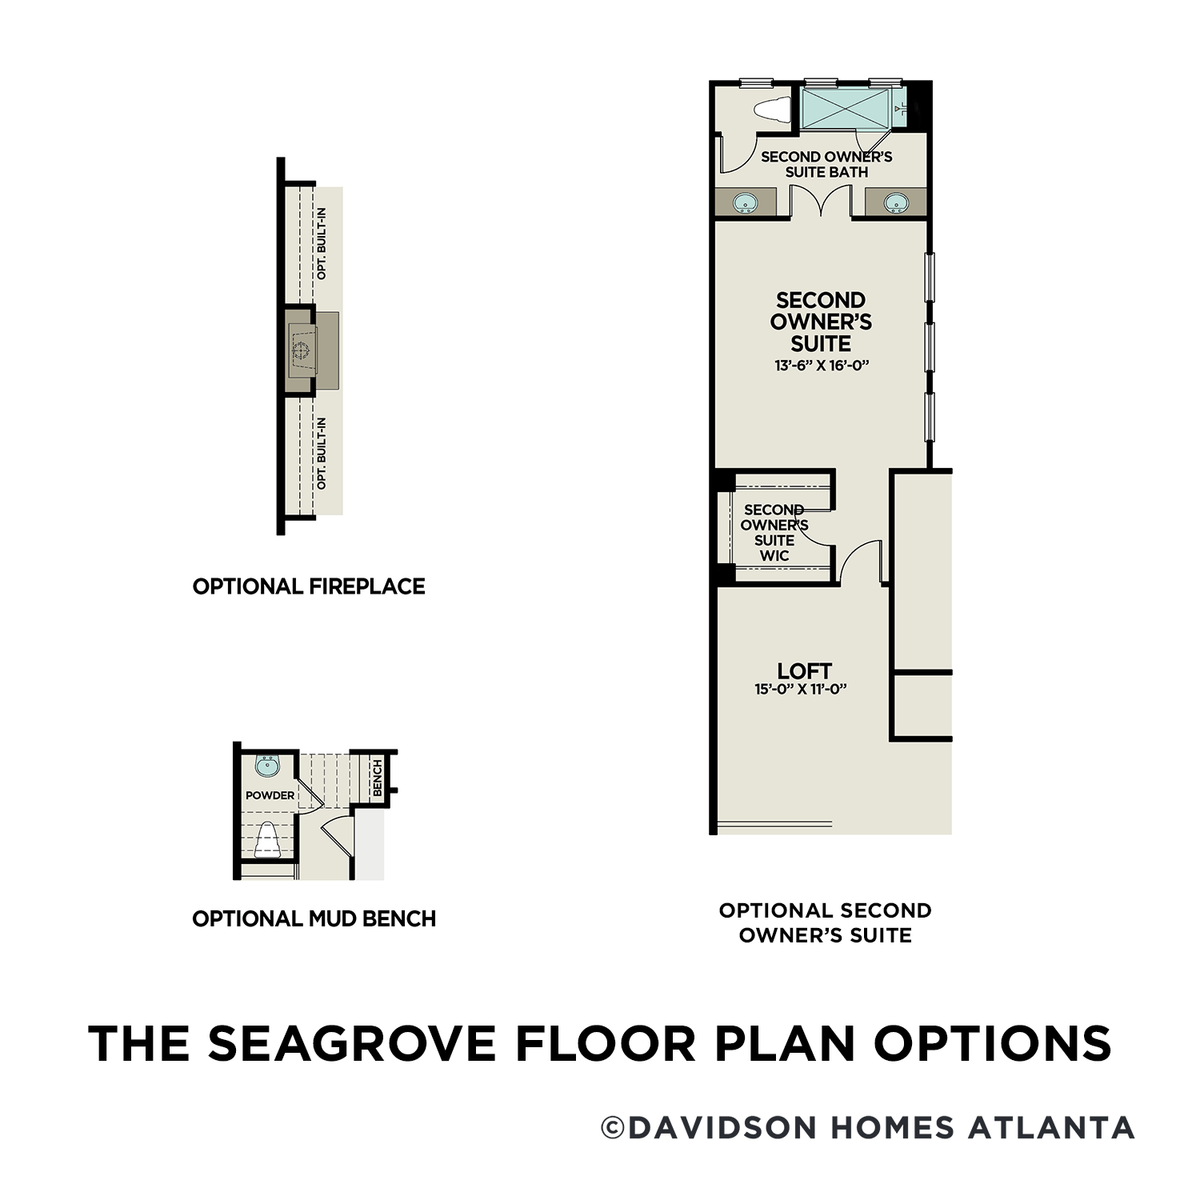 3 - The Seagrove B floor plan layout for 752 Stickley Oak Way in Davidson Homes' The Village at Towne Lake community.